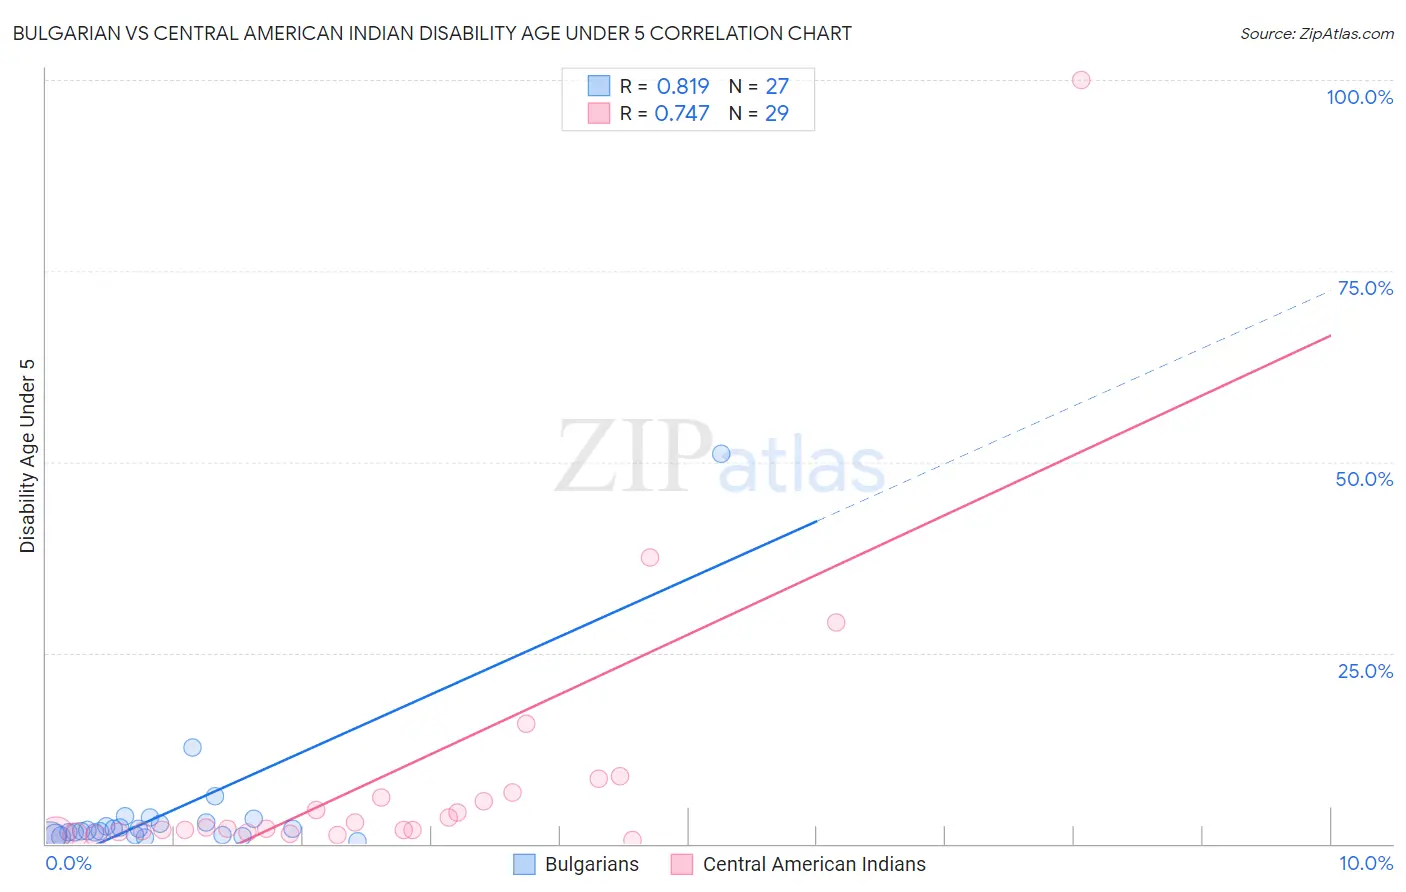 Bulgarian vs Central American Indian Disability Age Under 5